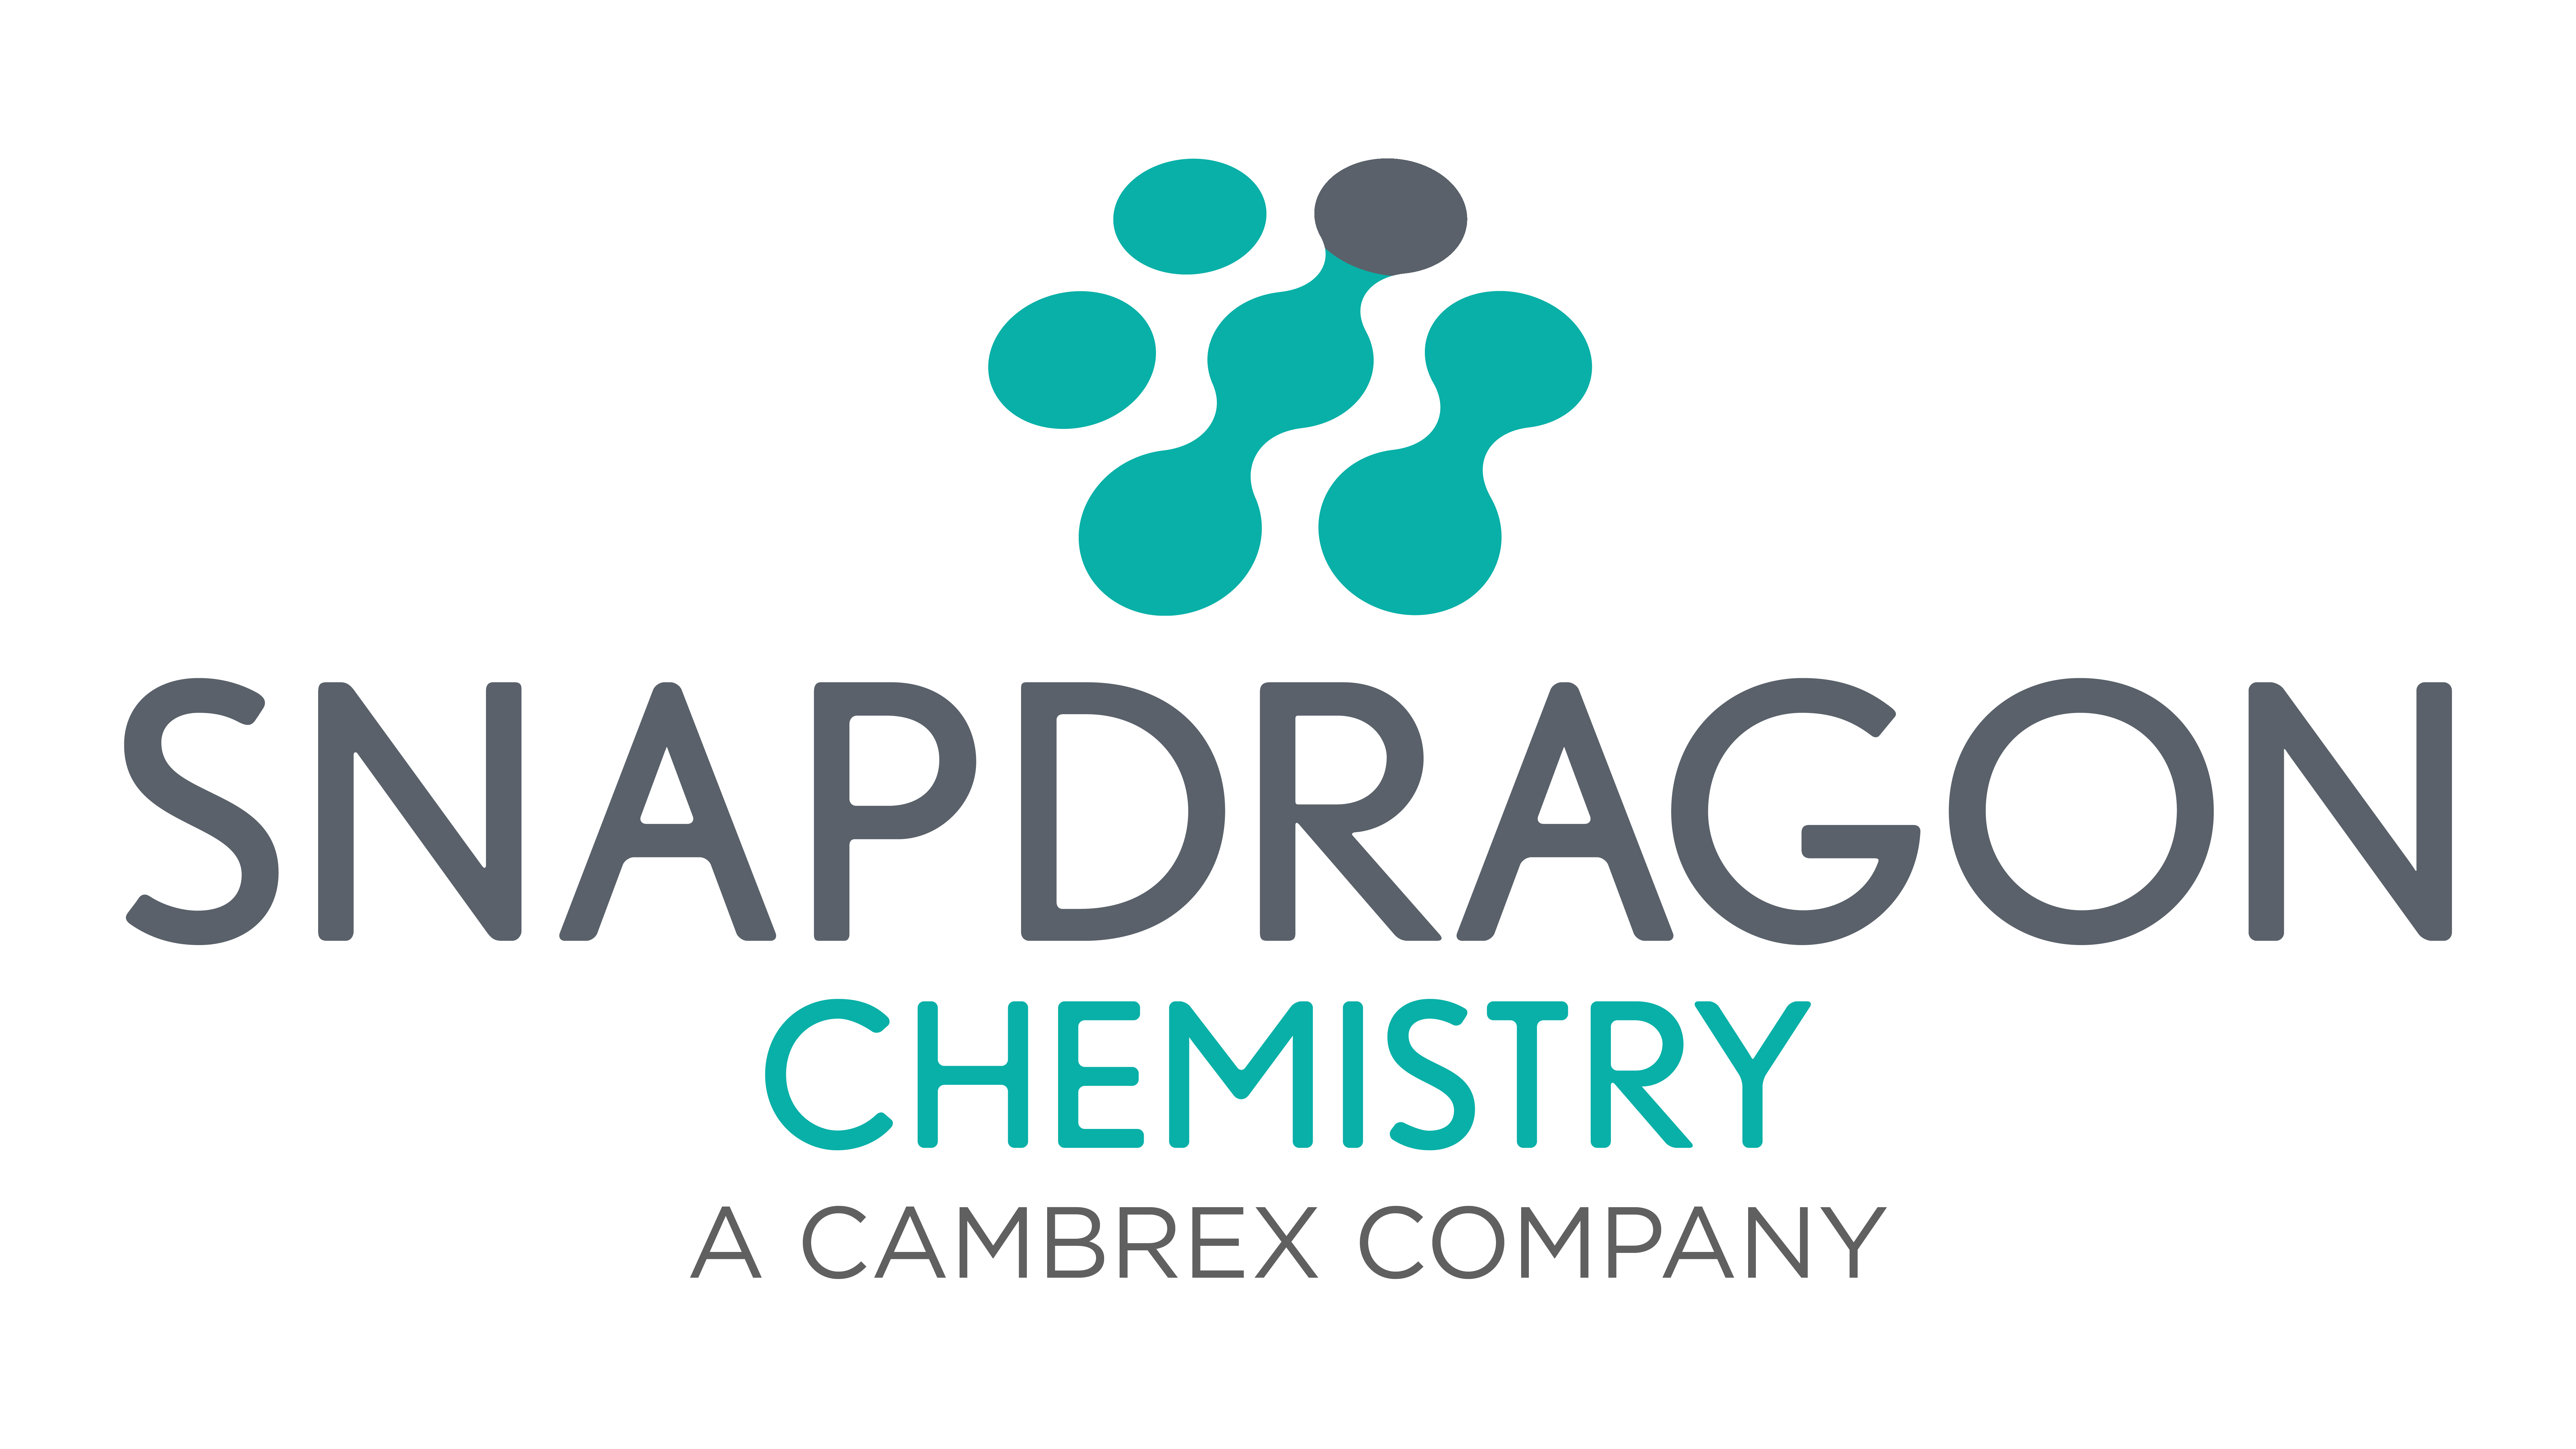 Cambrex Completes Acquisition of Snapdragon Chemistry, a Leader in Continuous Flow API Development Services